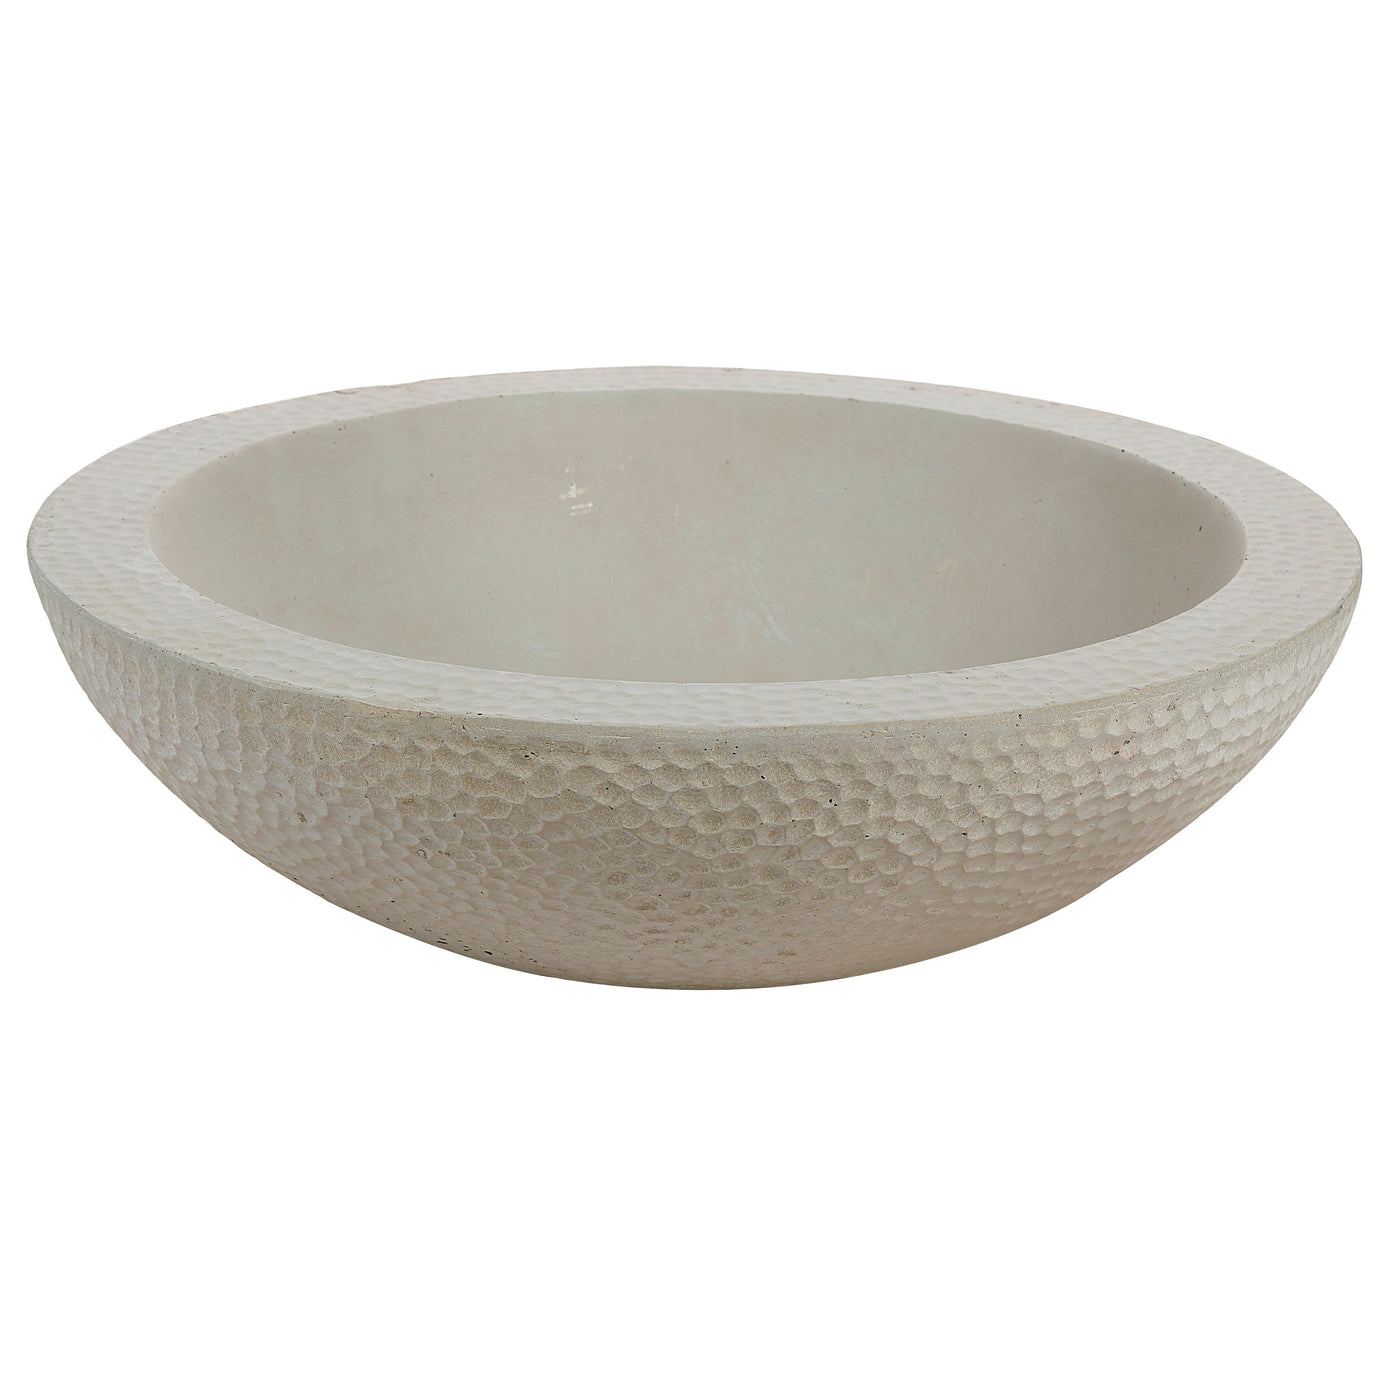 Handcrafted hammered-like stonecast low bowl planter in light grey